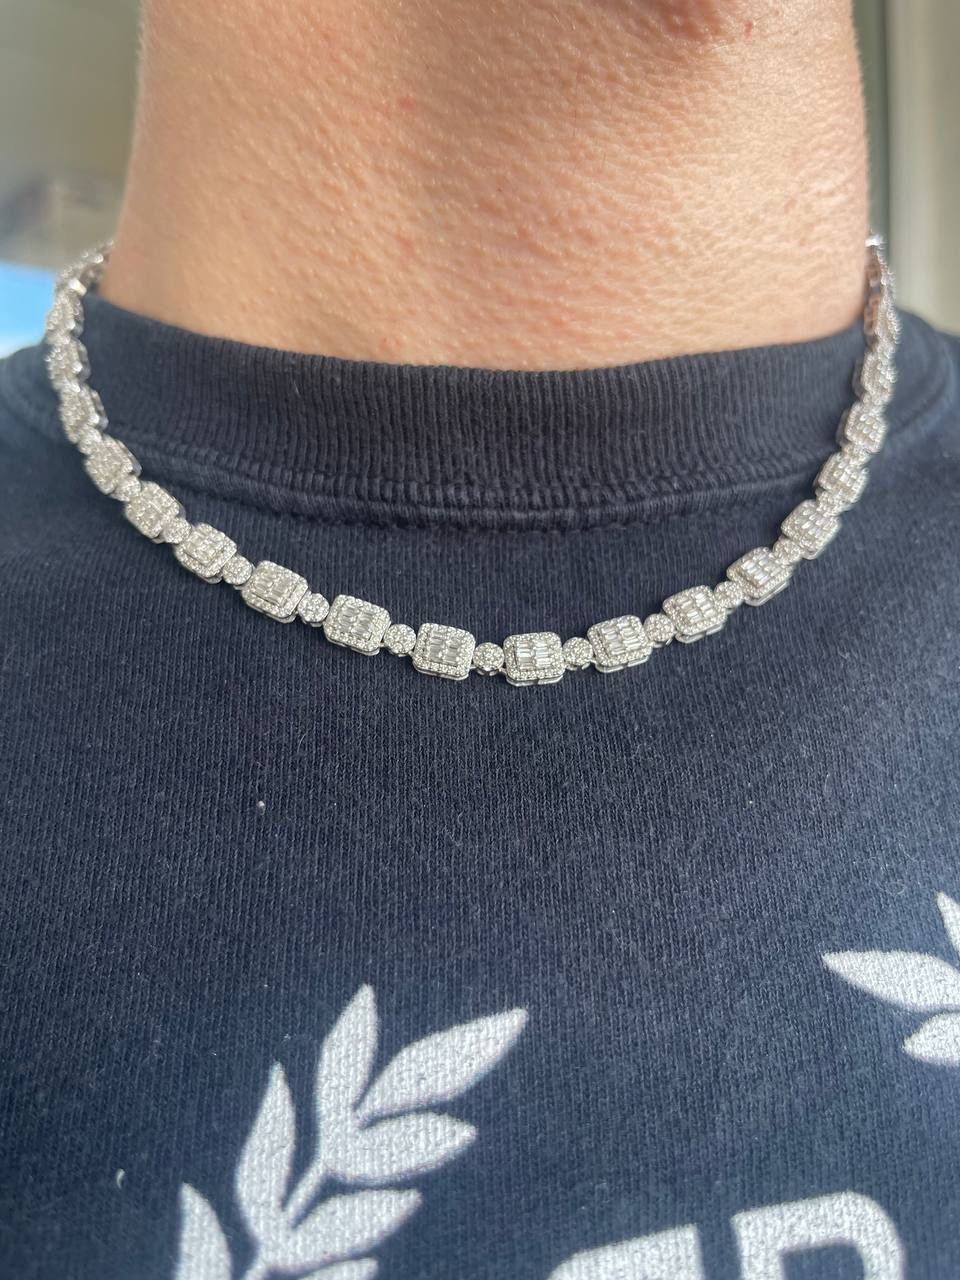 14k solid white gold vvs diamond baguette and round stones natural necklace pave flower set